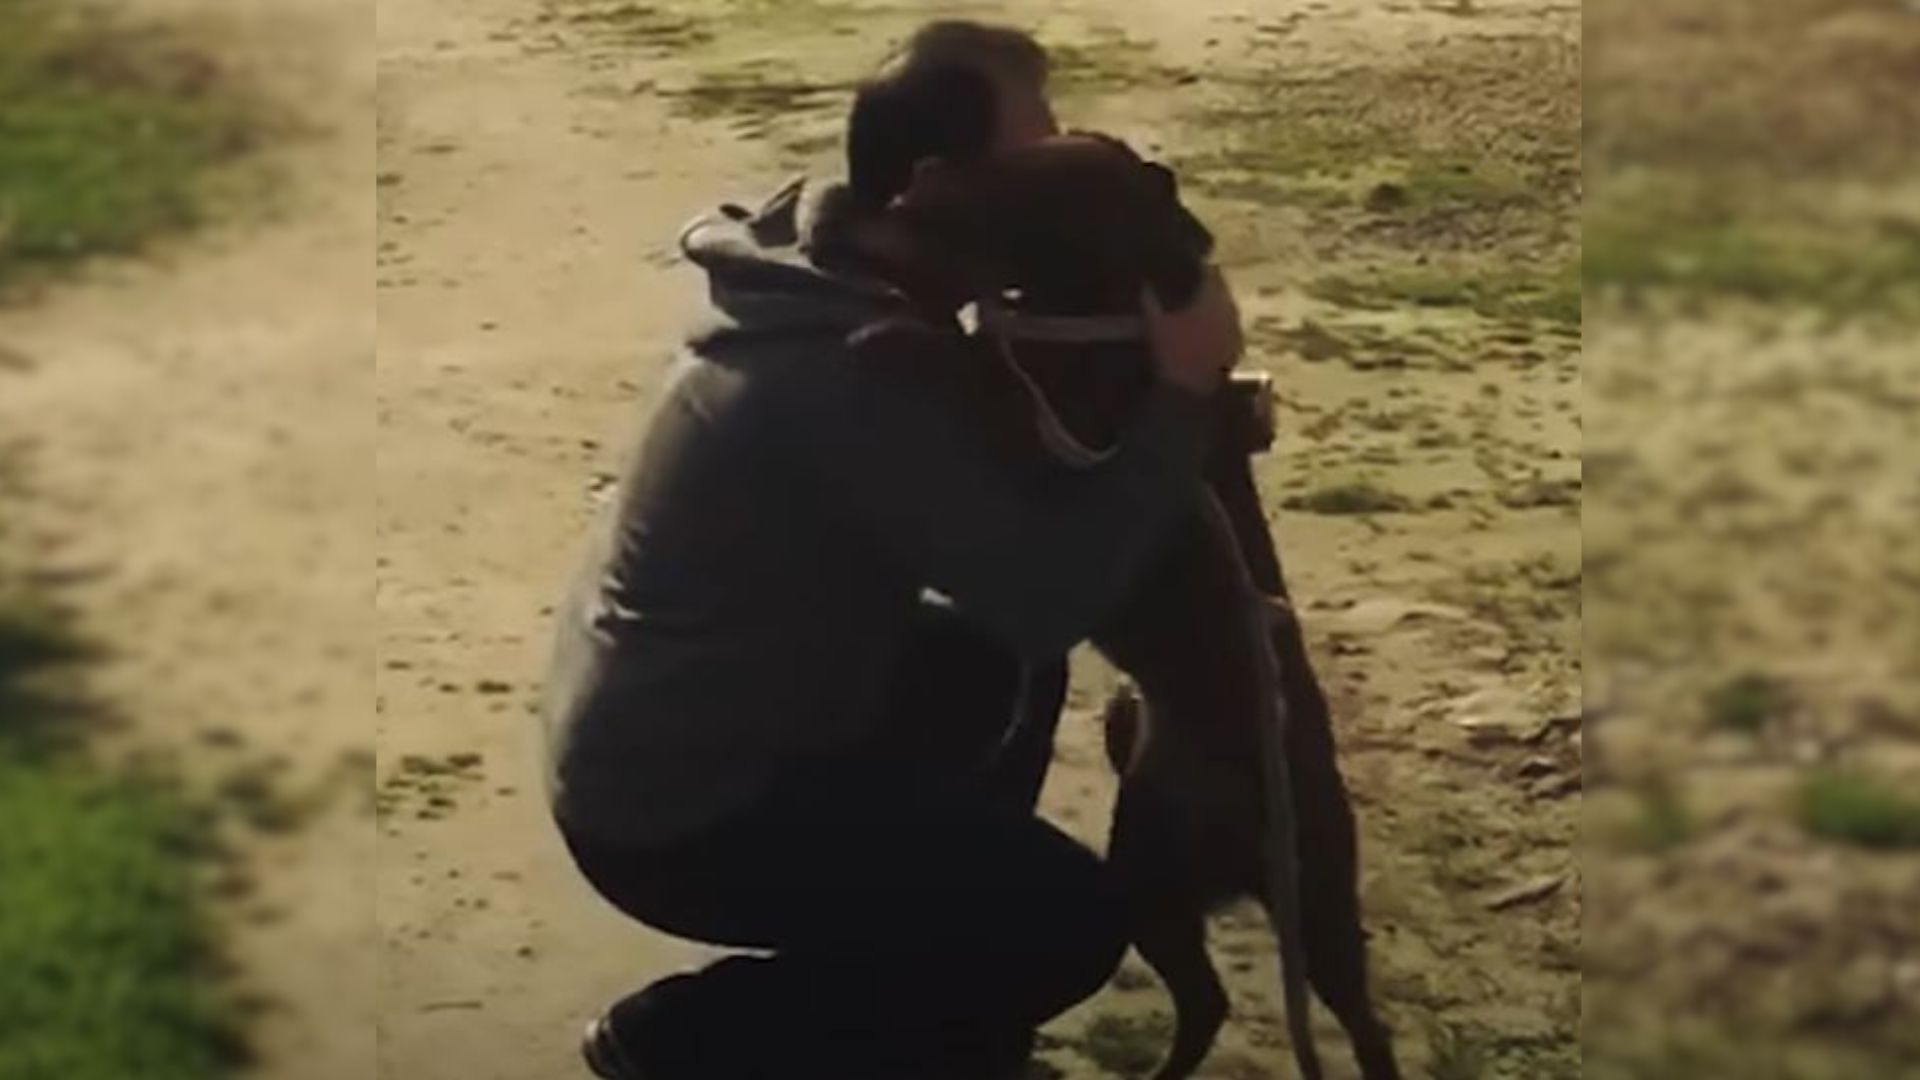 Labrador Lost For 2 Long Years Bursts With Happiness When She Finally Sees Her Dad